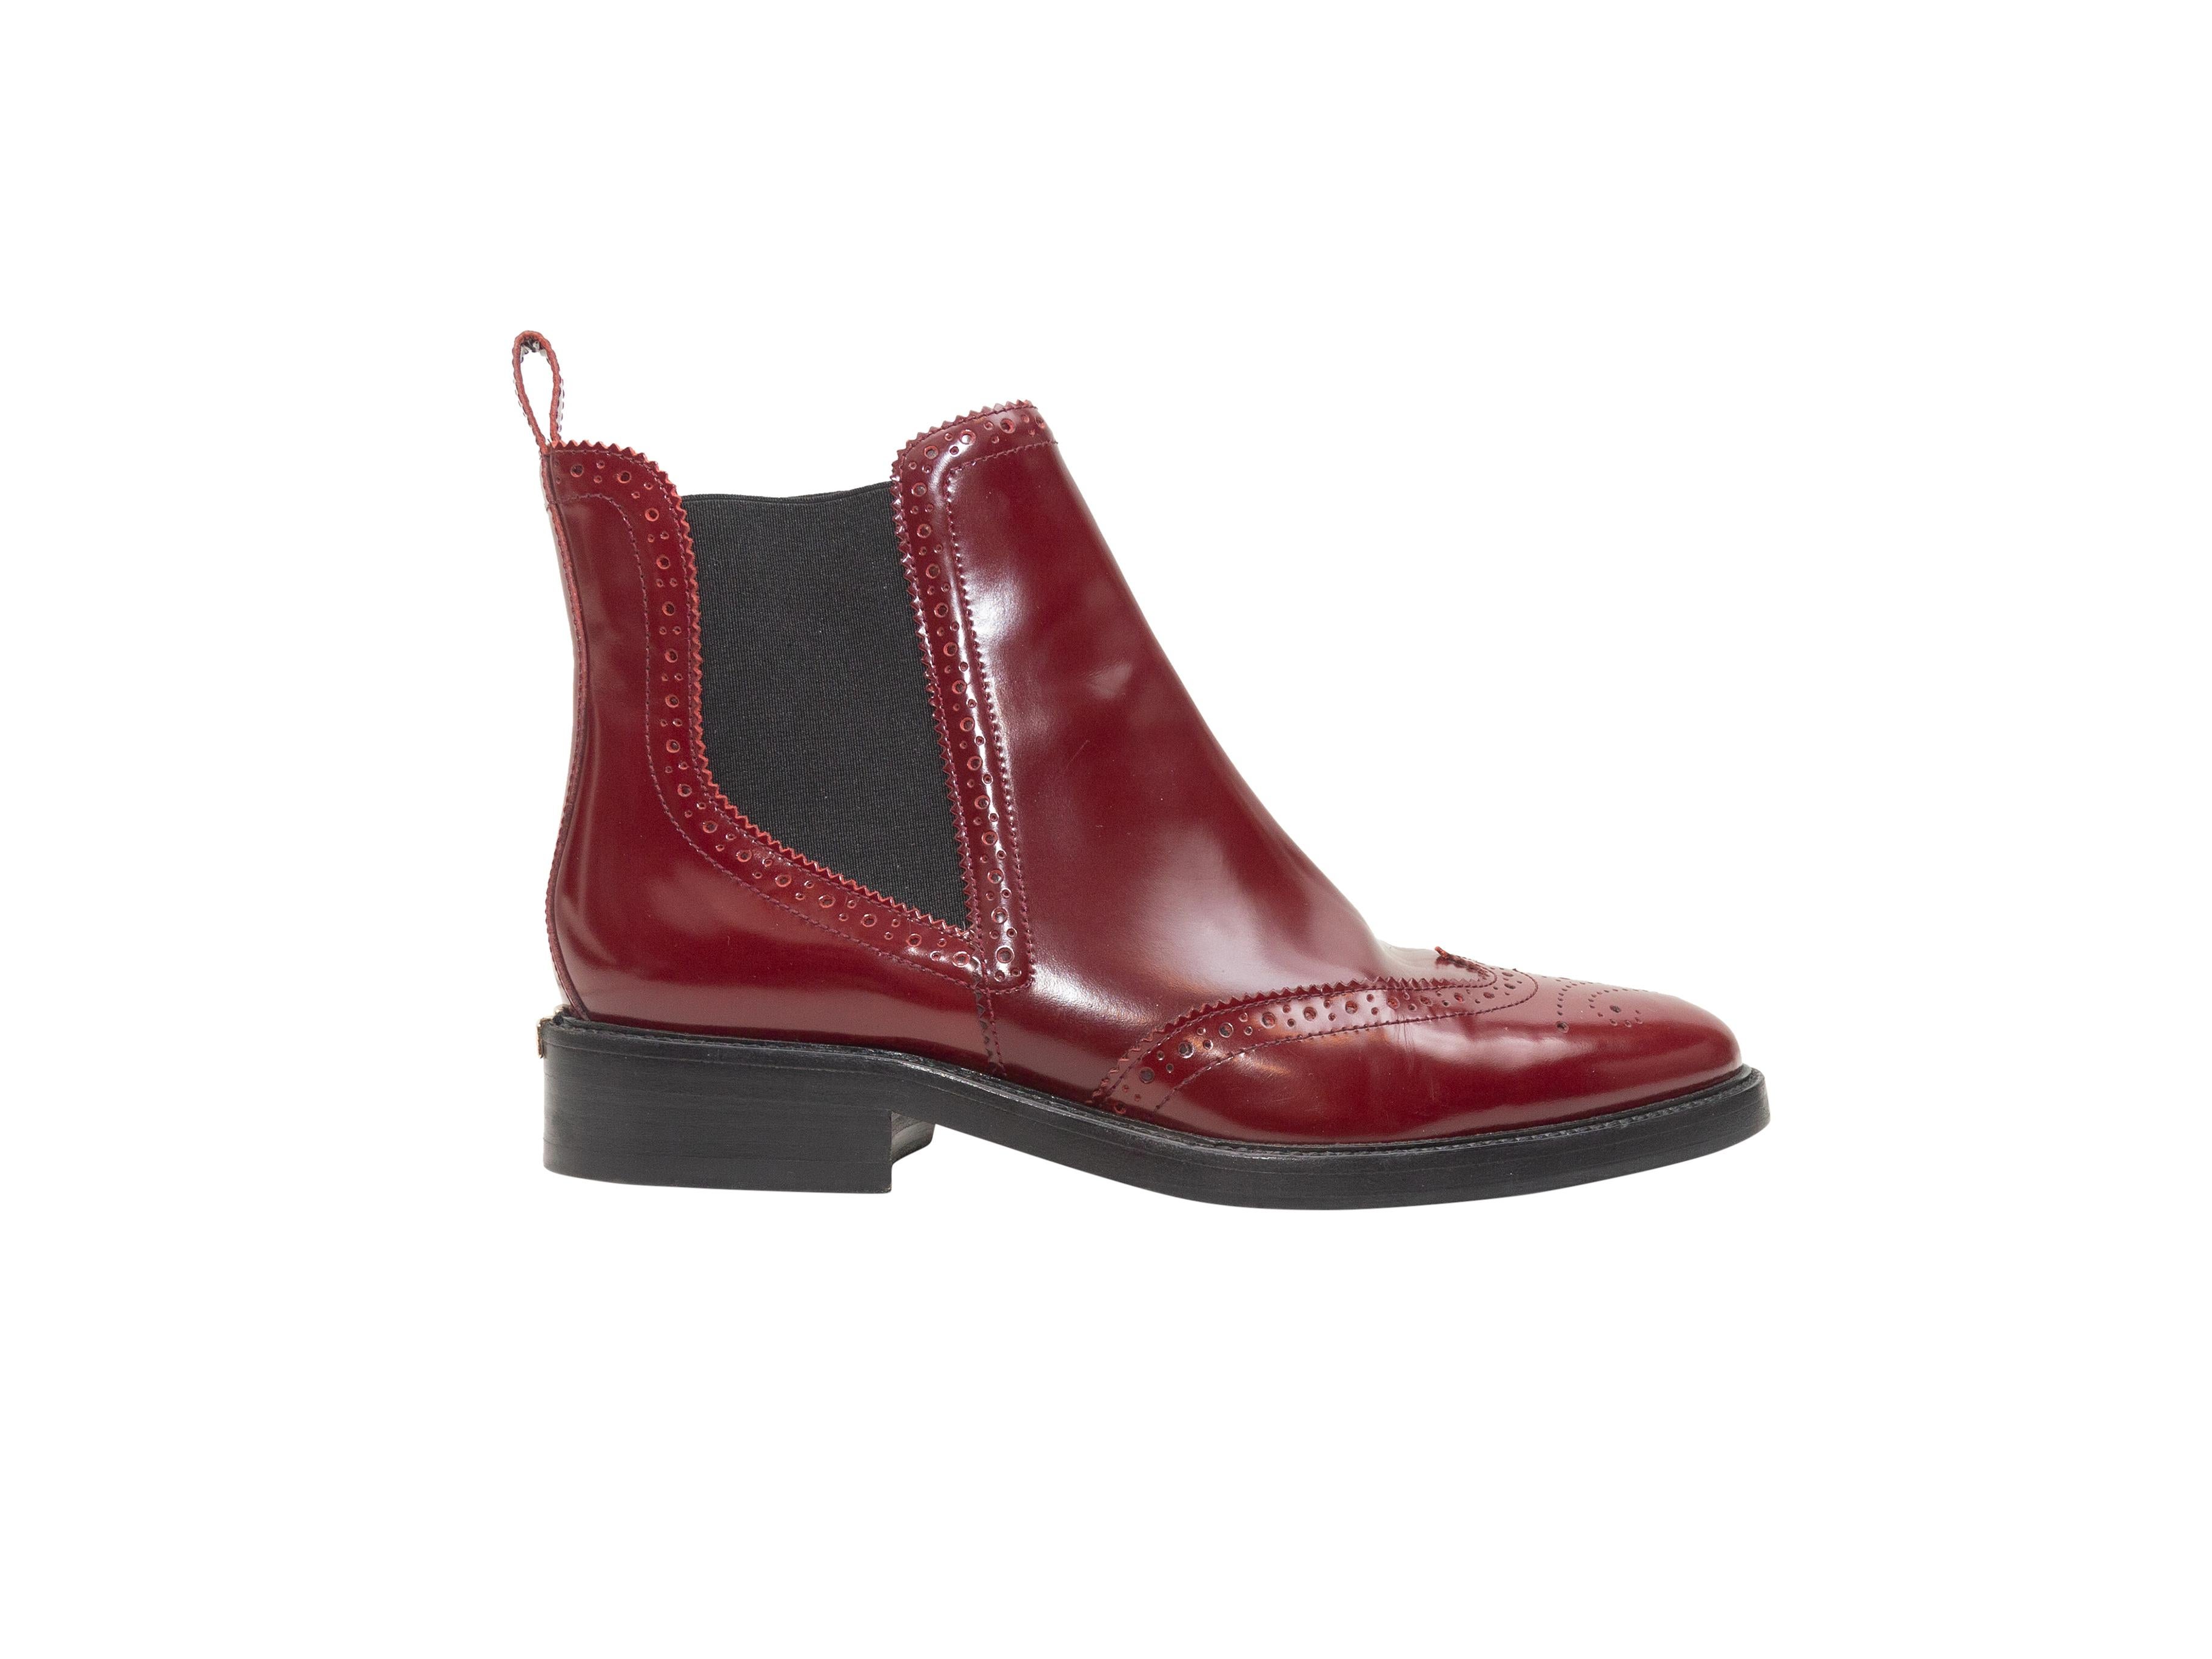 Women's Burberry Brogue Maroon Ankle Boots